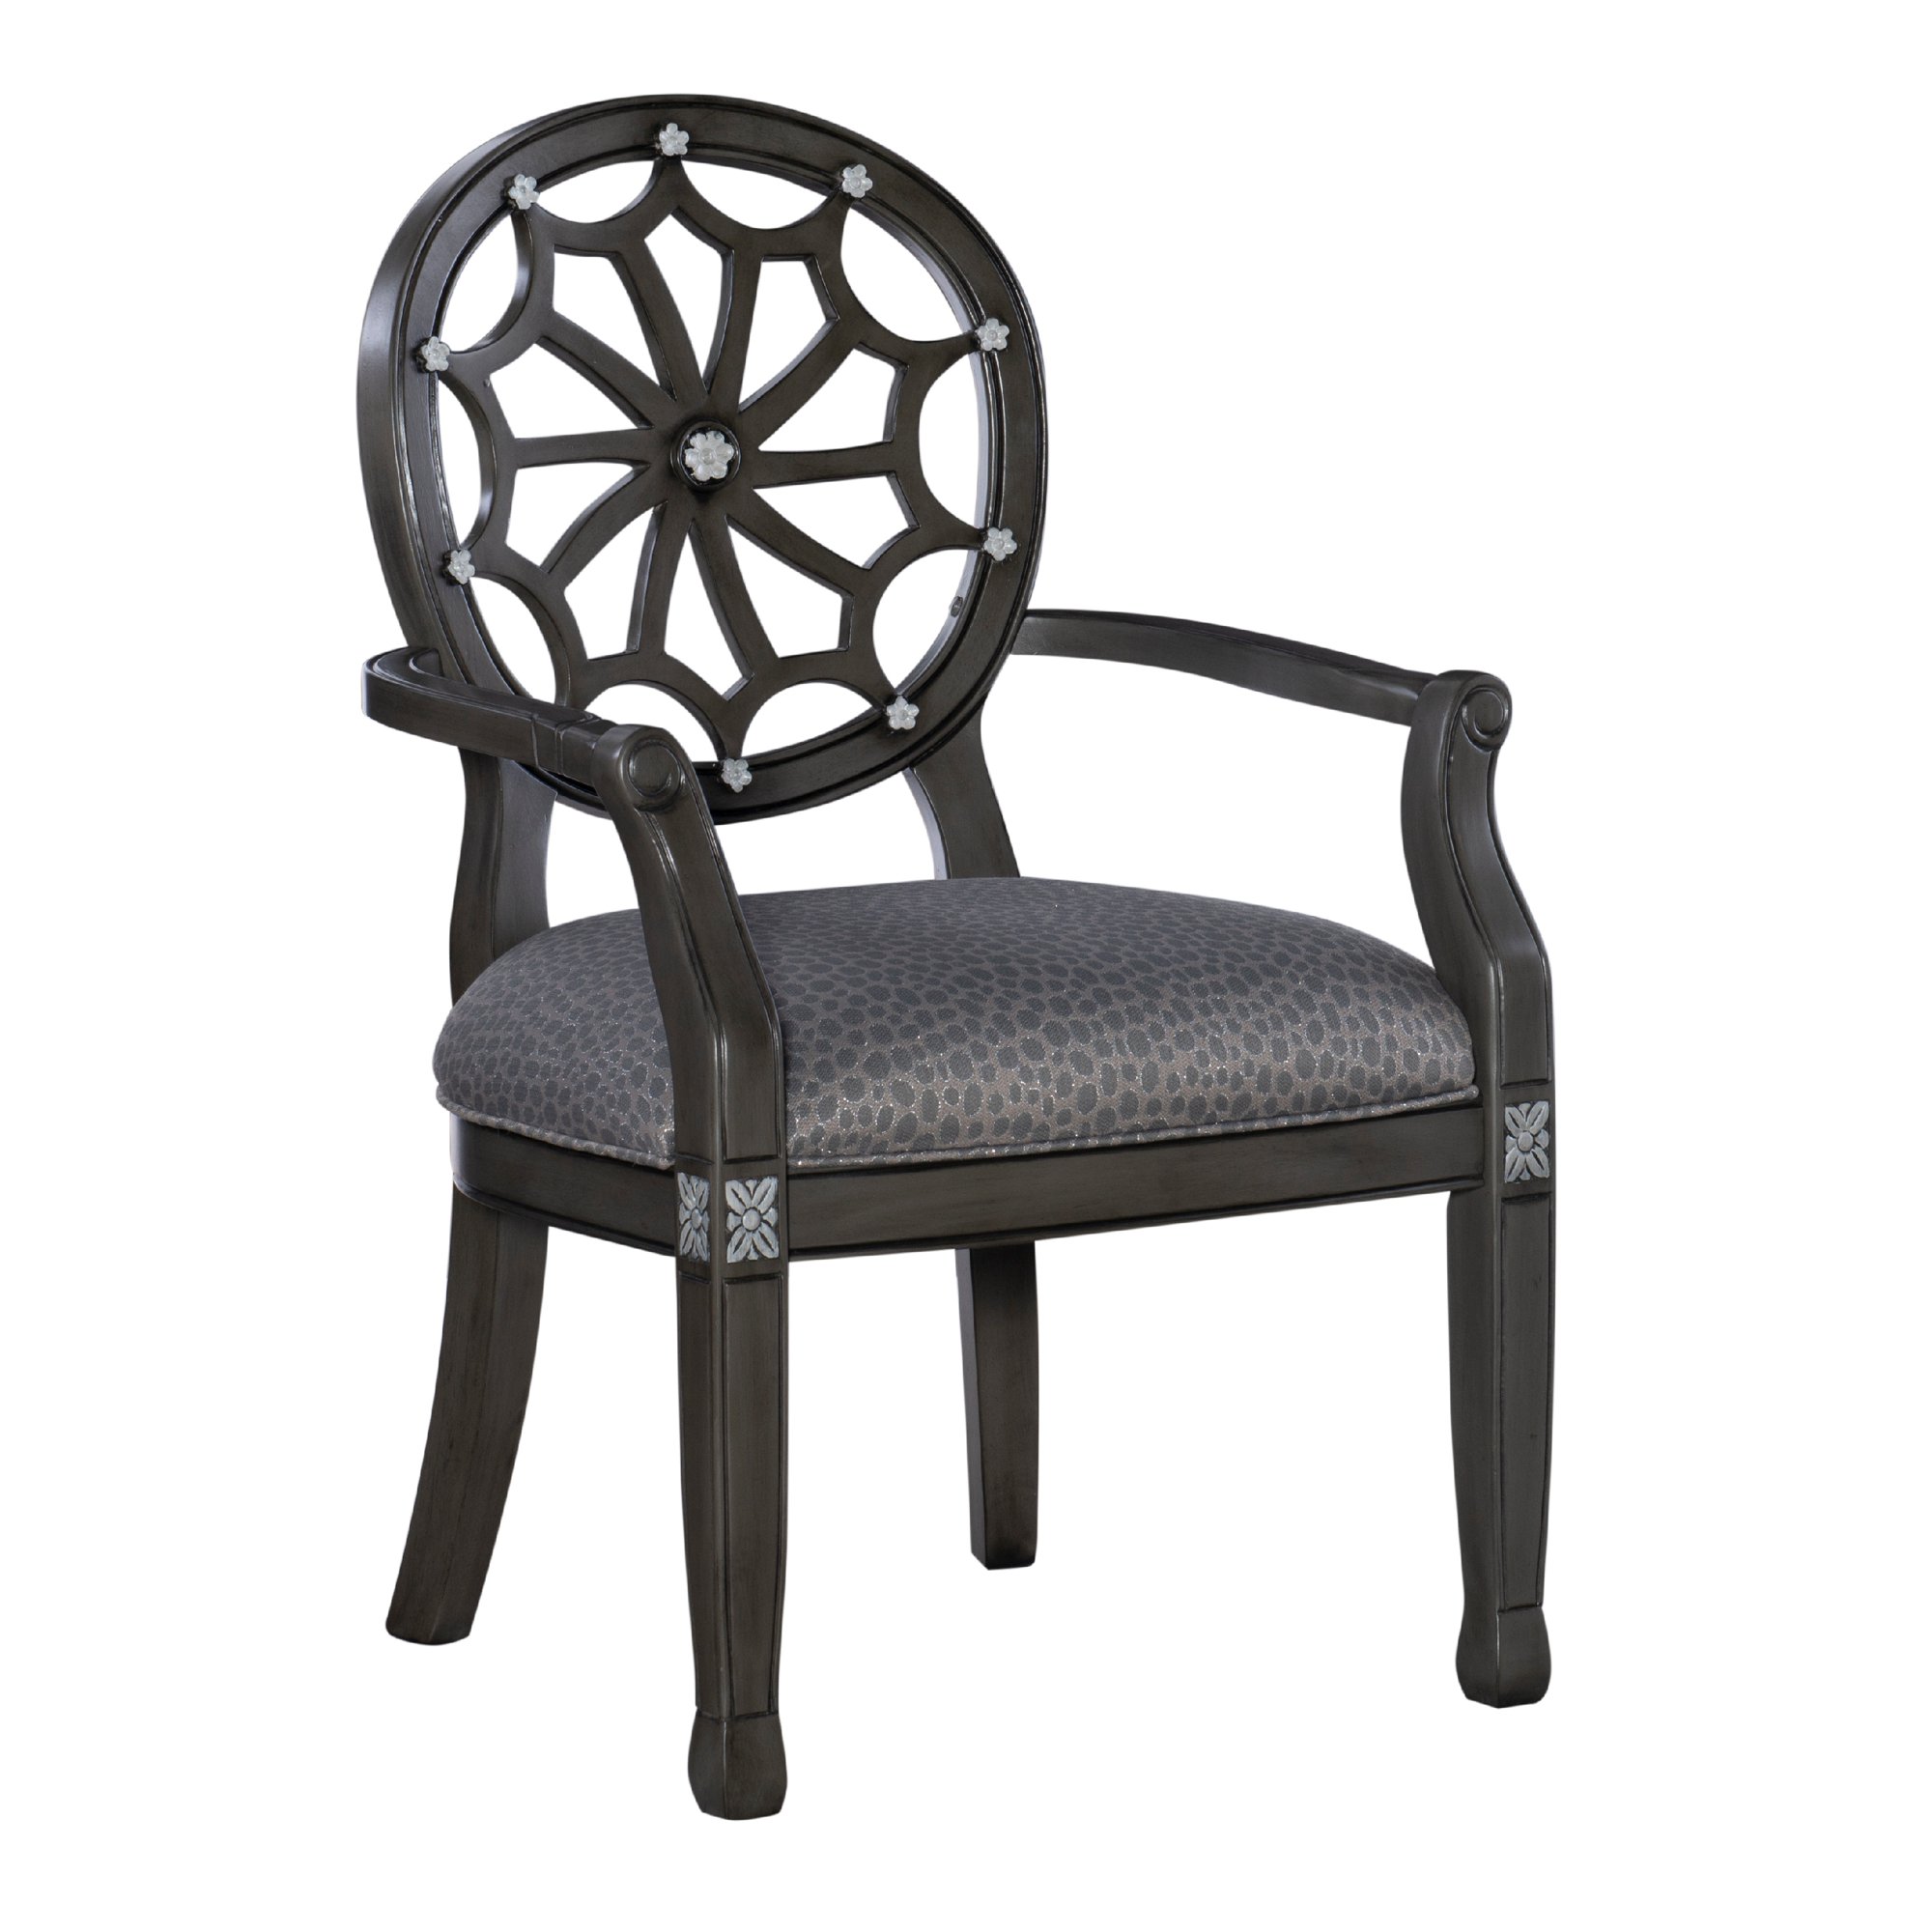 Powell Becliffe Spider Web Back Accent Lounge Chair w/ Arms (Gray Frame/ Leopard Pattern Fabric) $116 + Free Shipping